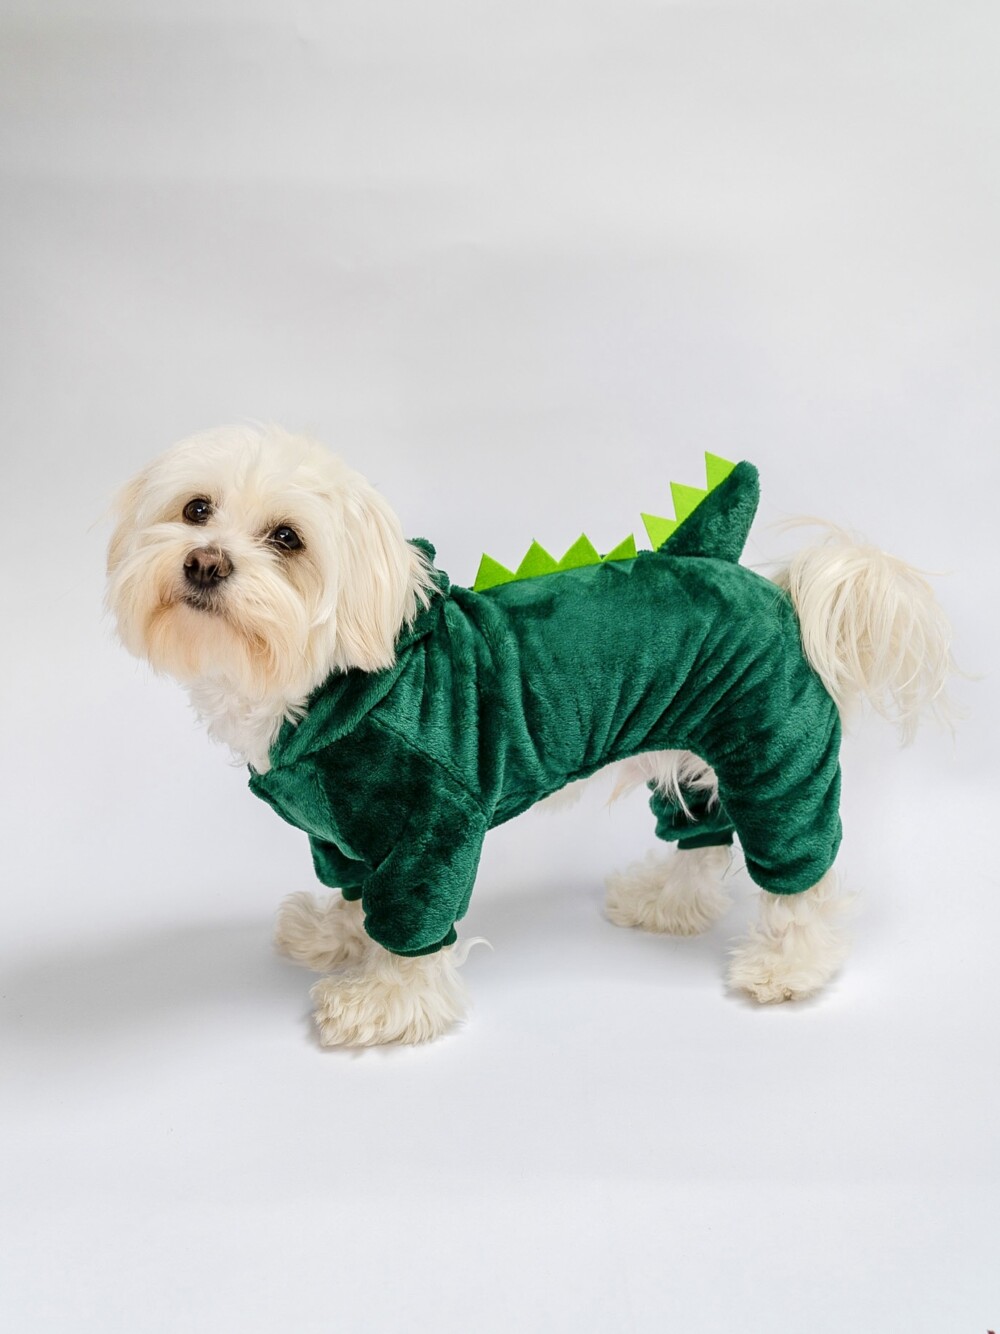 A cute small white dog wearing a green dinosaur costume